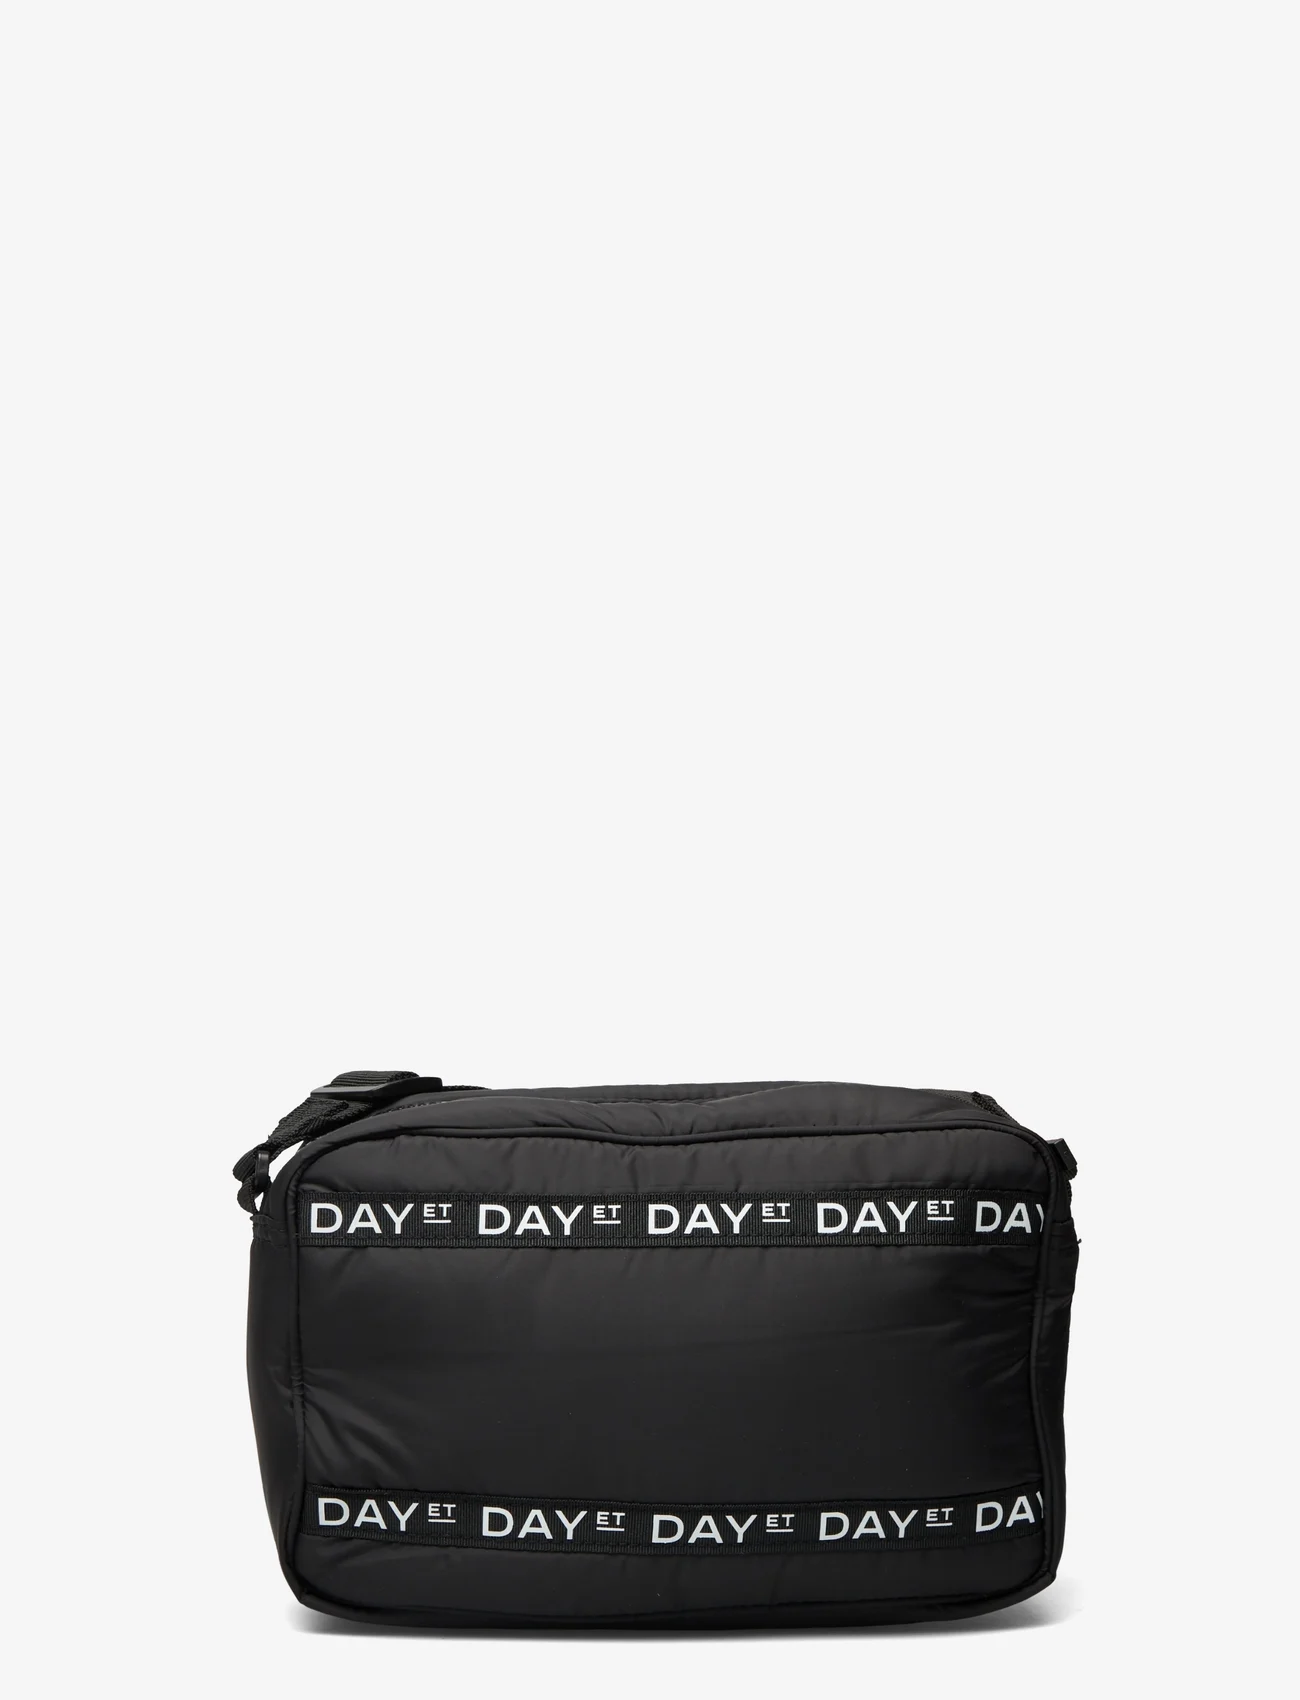 DAY ET - Day GW RE-Q Band Double - birthday gifts - black - 1